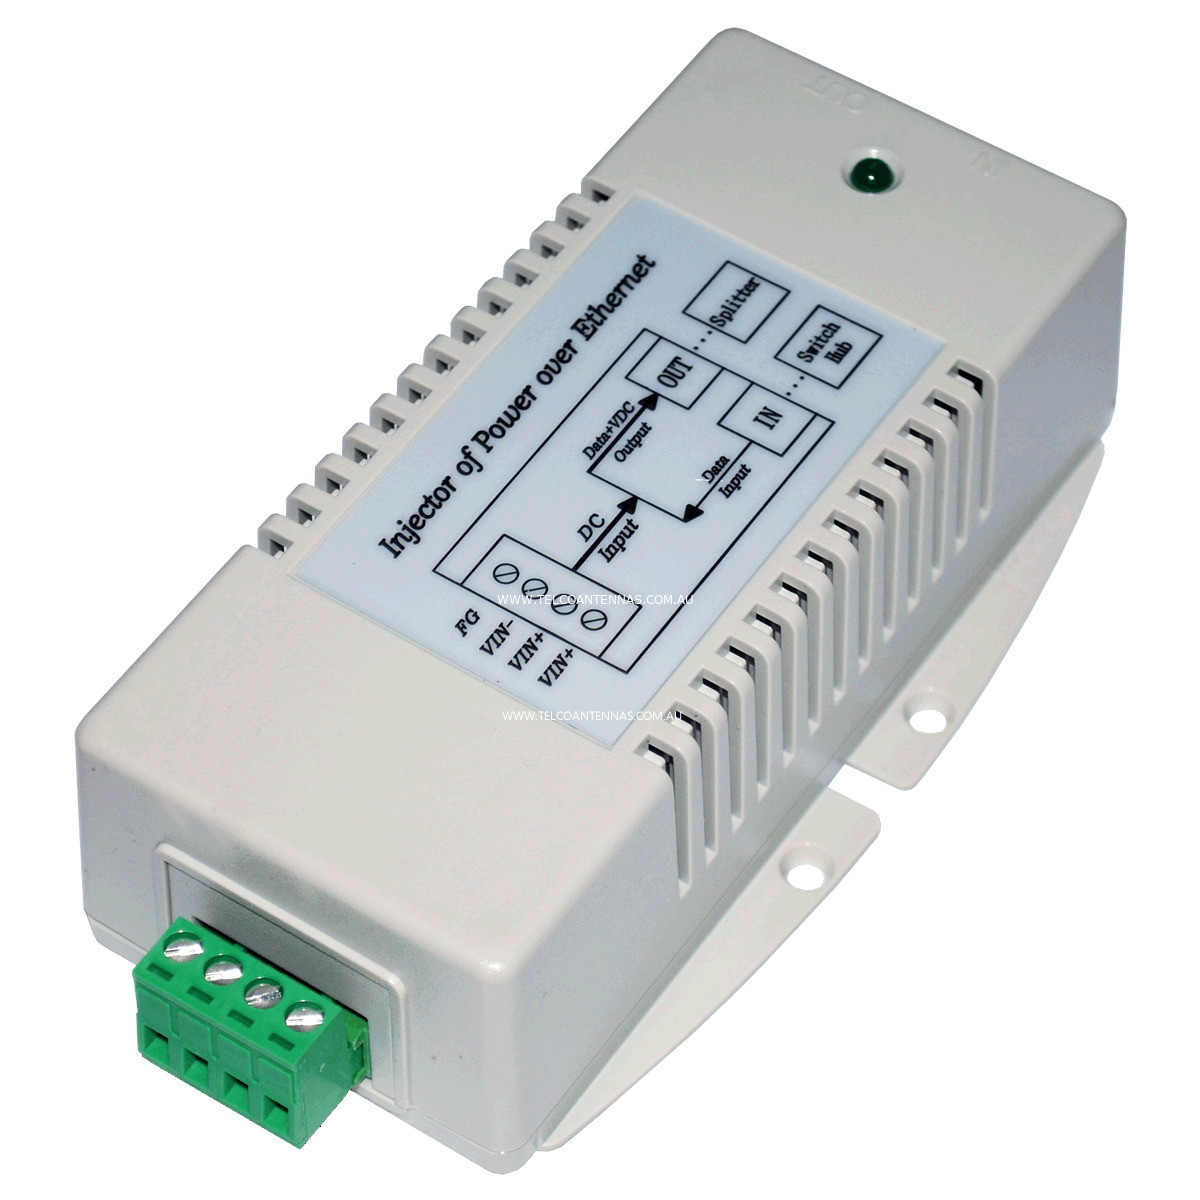 12vdc To 56vdc Poe Power Over Ethernet Injector